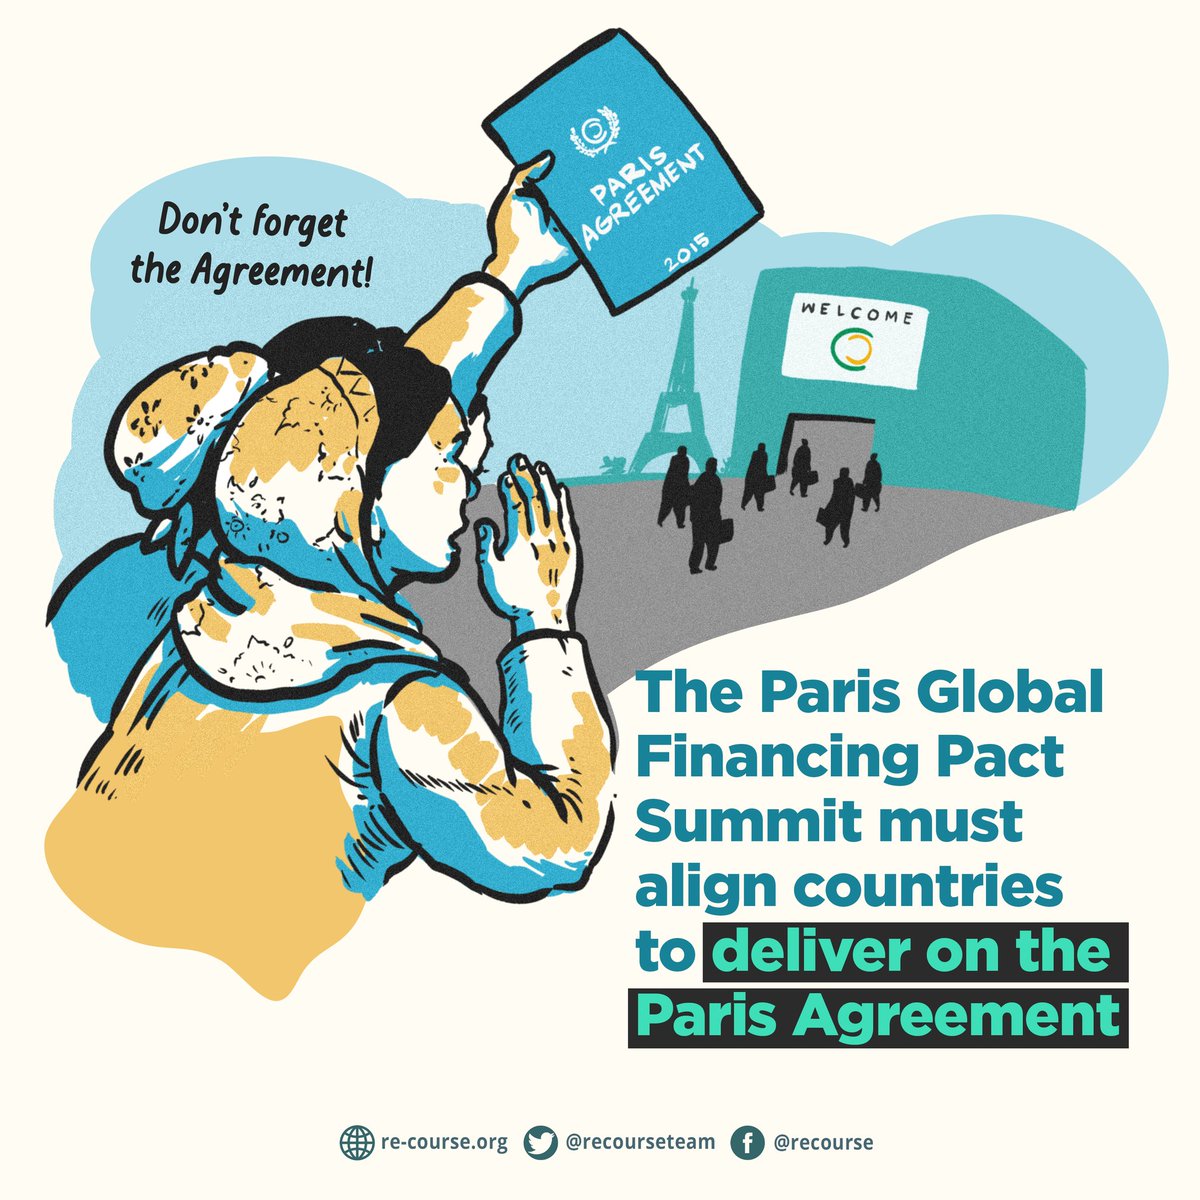 The #GlobalFinancialPact summit must align countries to deliver on the #ParisAgreement, by working fast to realign finance with a sustainable renewable future & rapidly scaling back support for fossil fuels from the global North